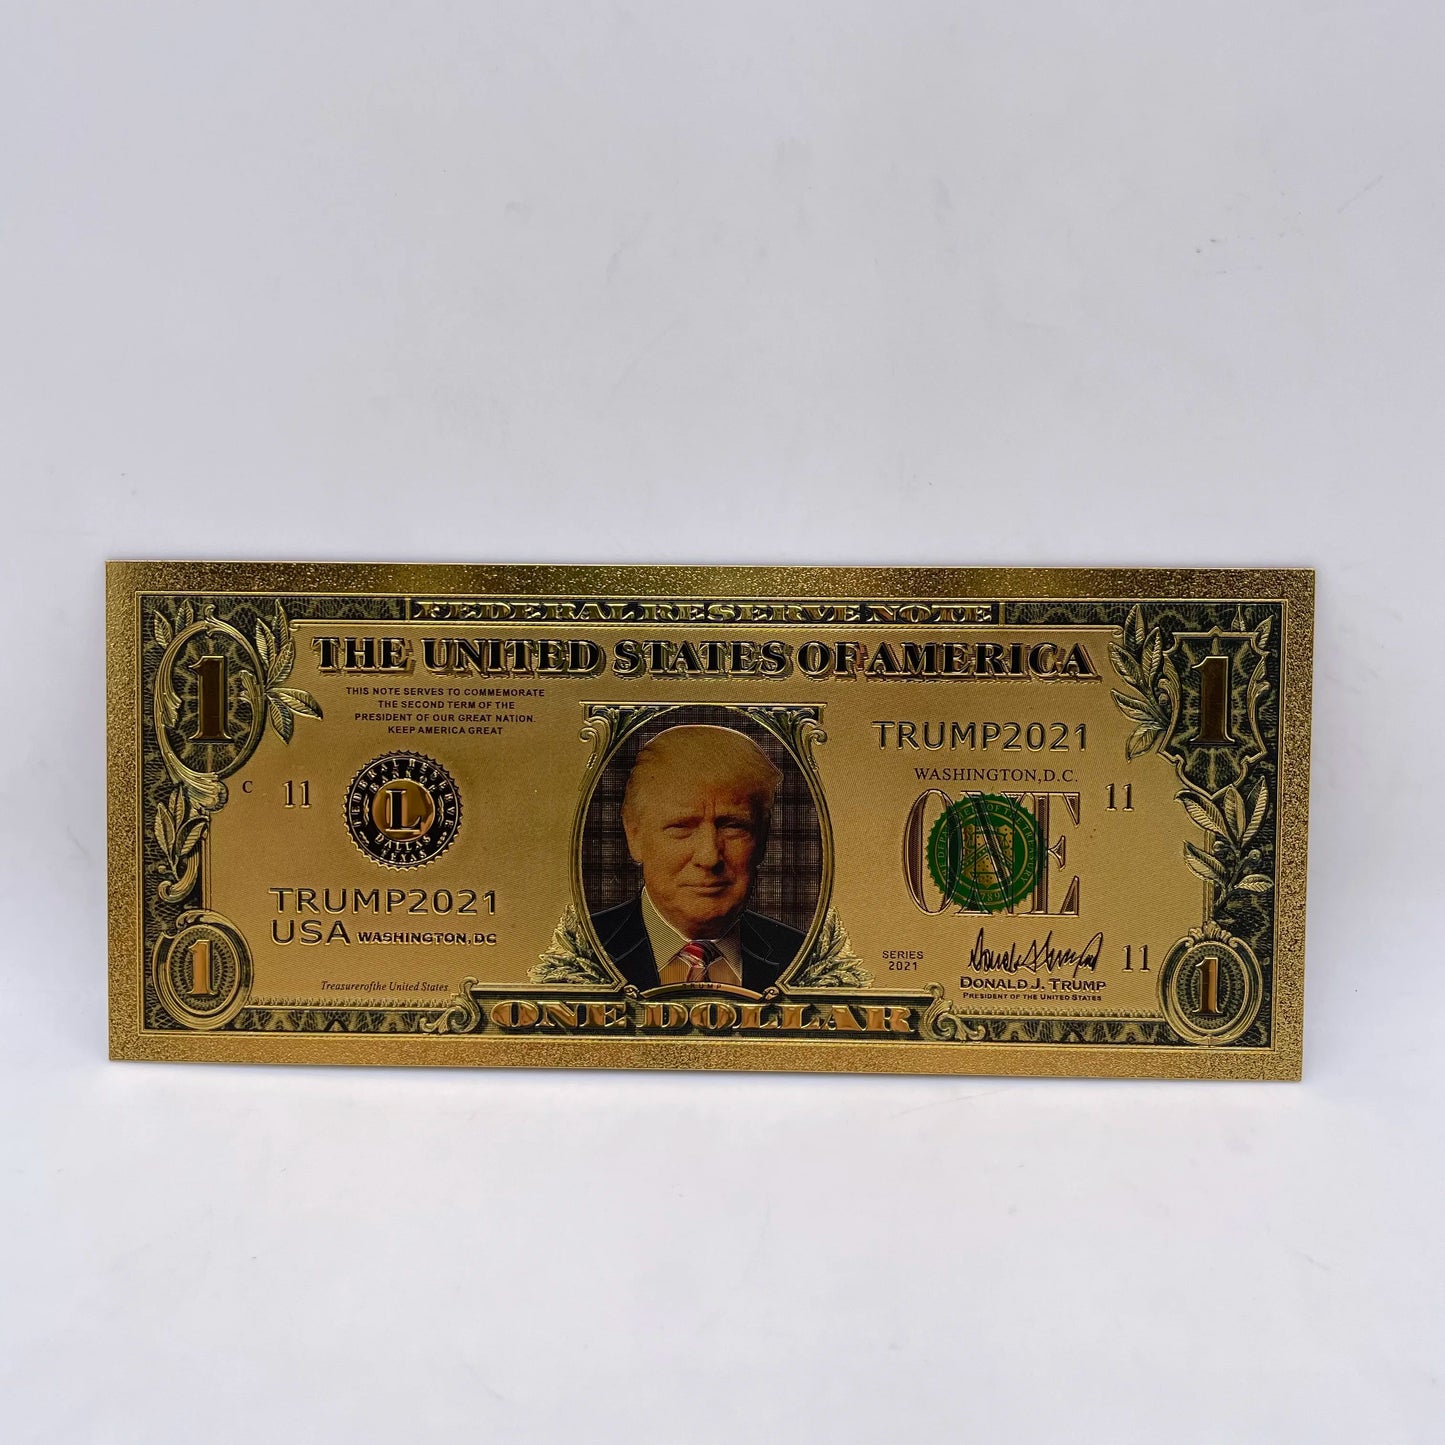 24k Color Gold Banknote Donald Trump Gold Plated $1000 US Commemorative Banknote Golden Tickets Home Decor Gifts for Collection